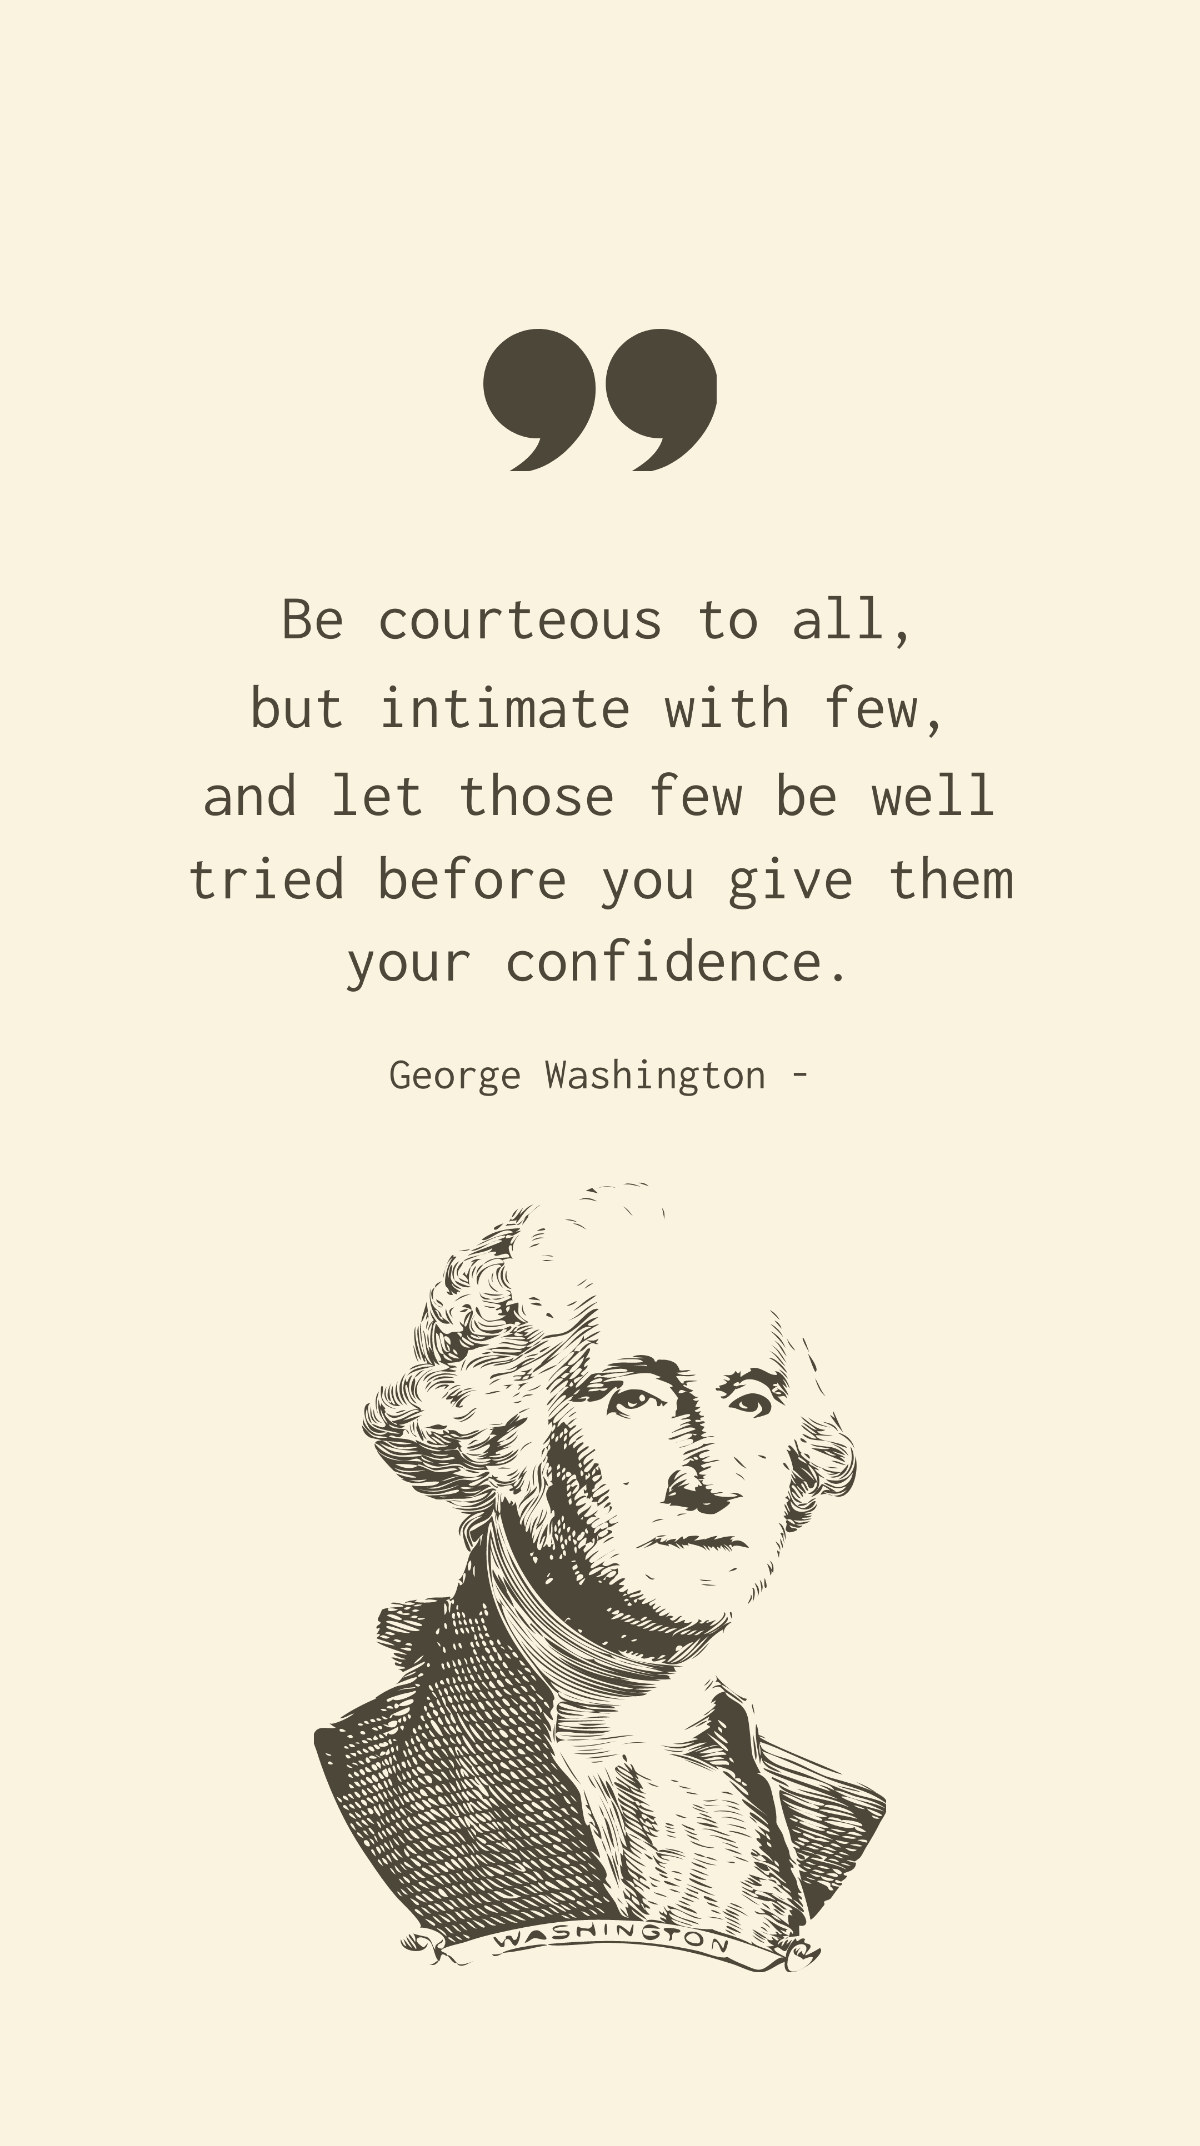 George Washington - Be courteous to all, but intimate with few, and let those few be well tried before you give them your confidence. Template